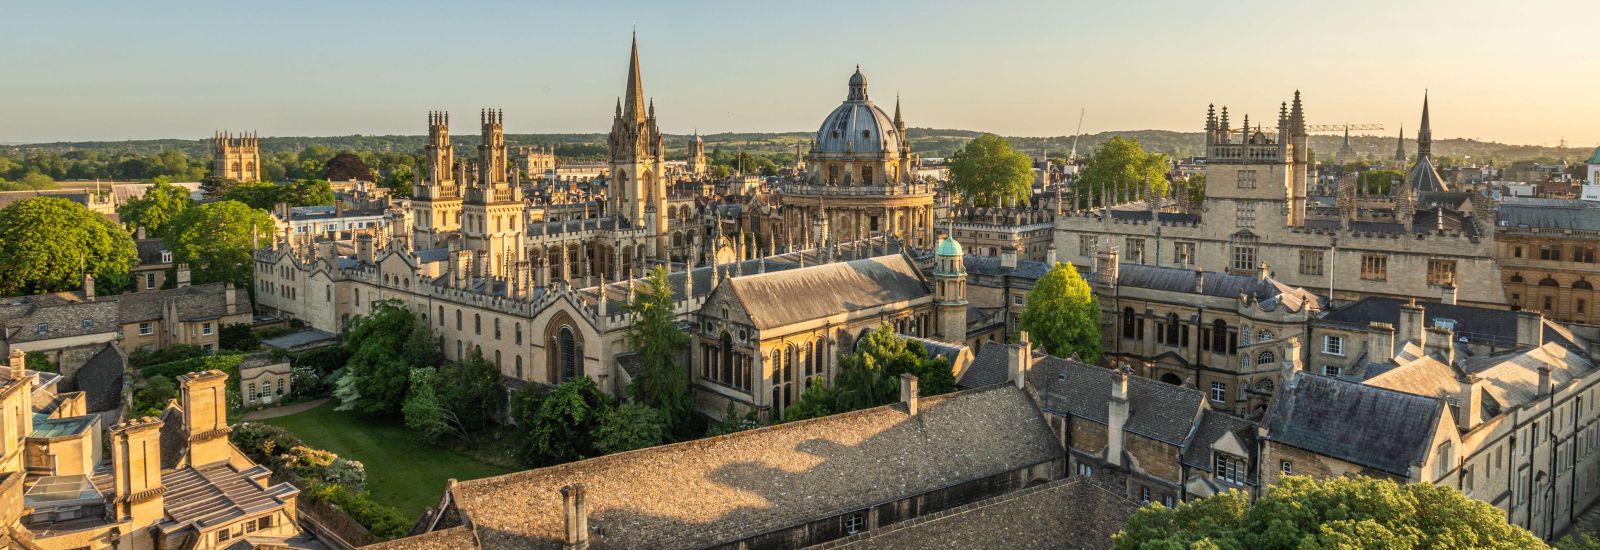 Skyline image of Oxford featuring the Radcliffe Camera and the University Church of St Mary The Virgin